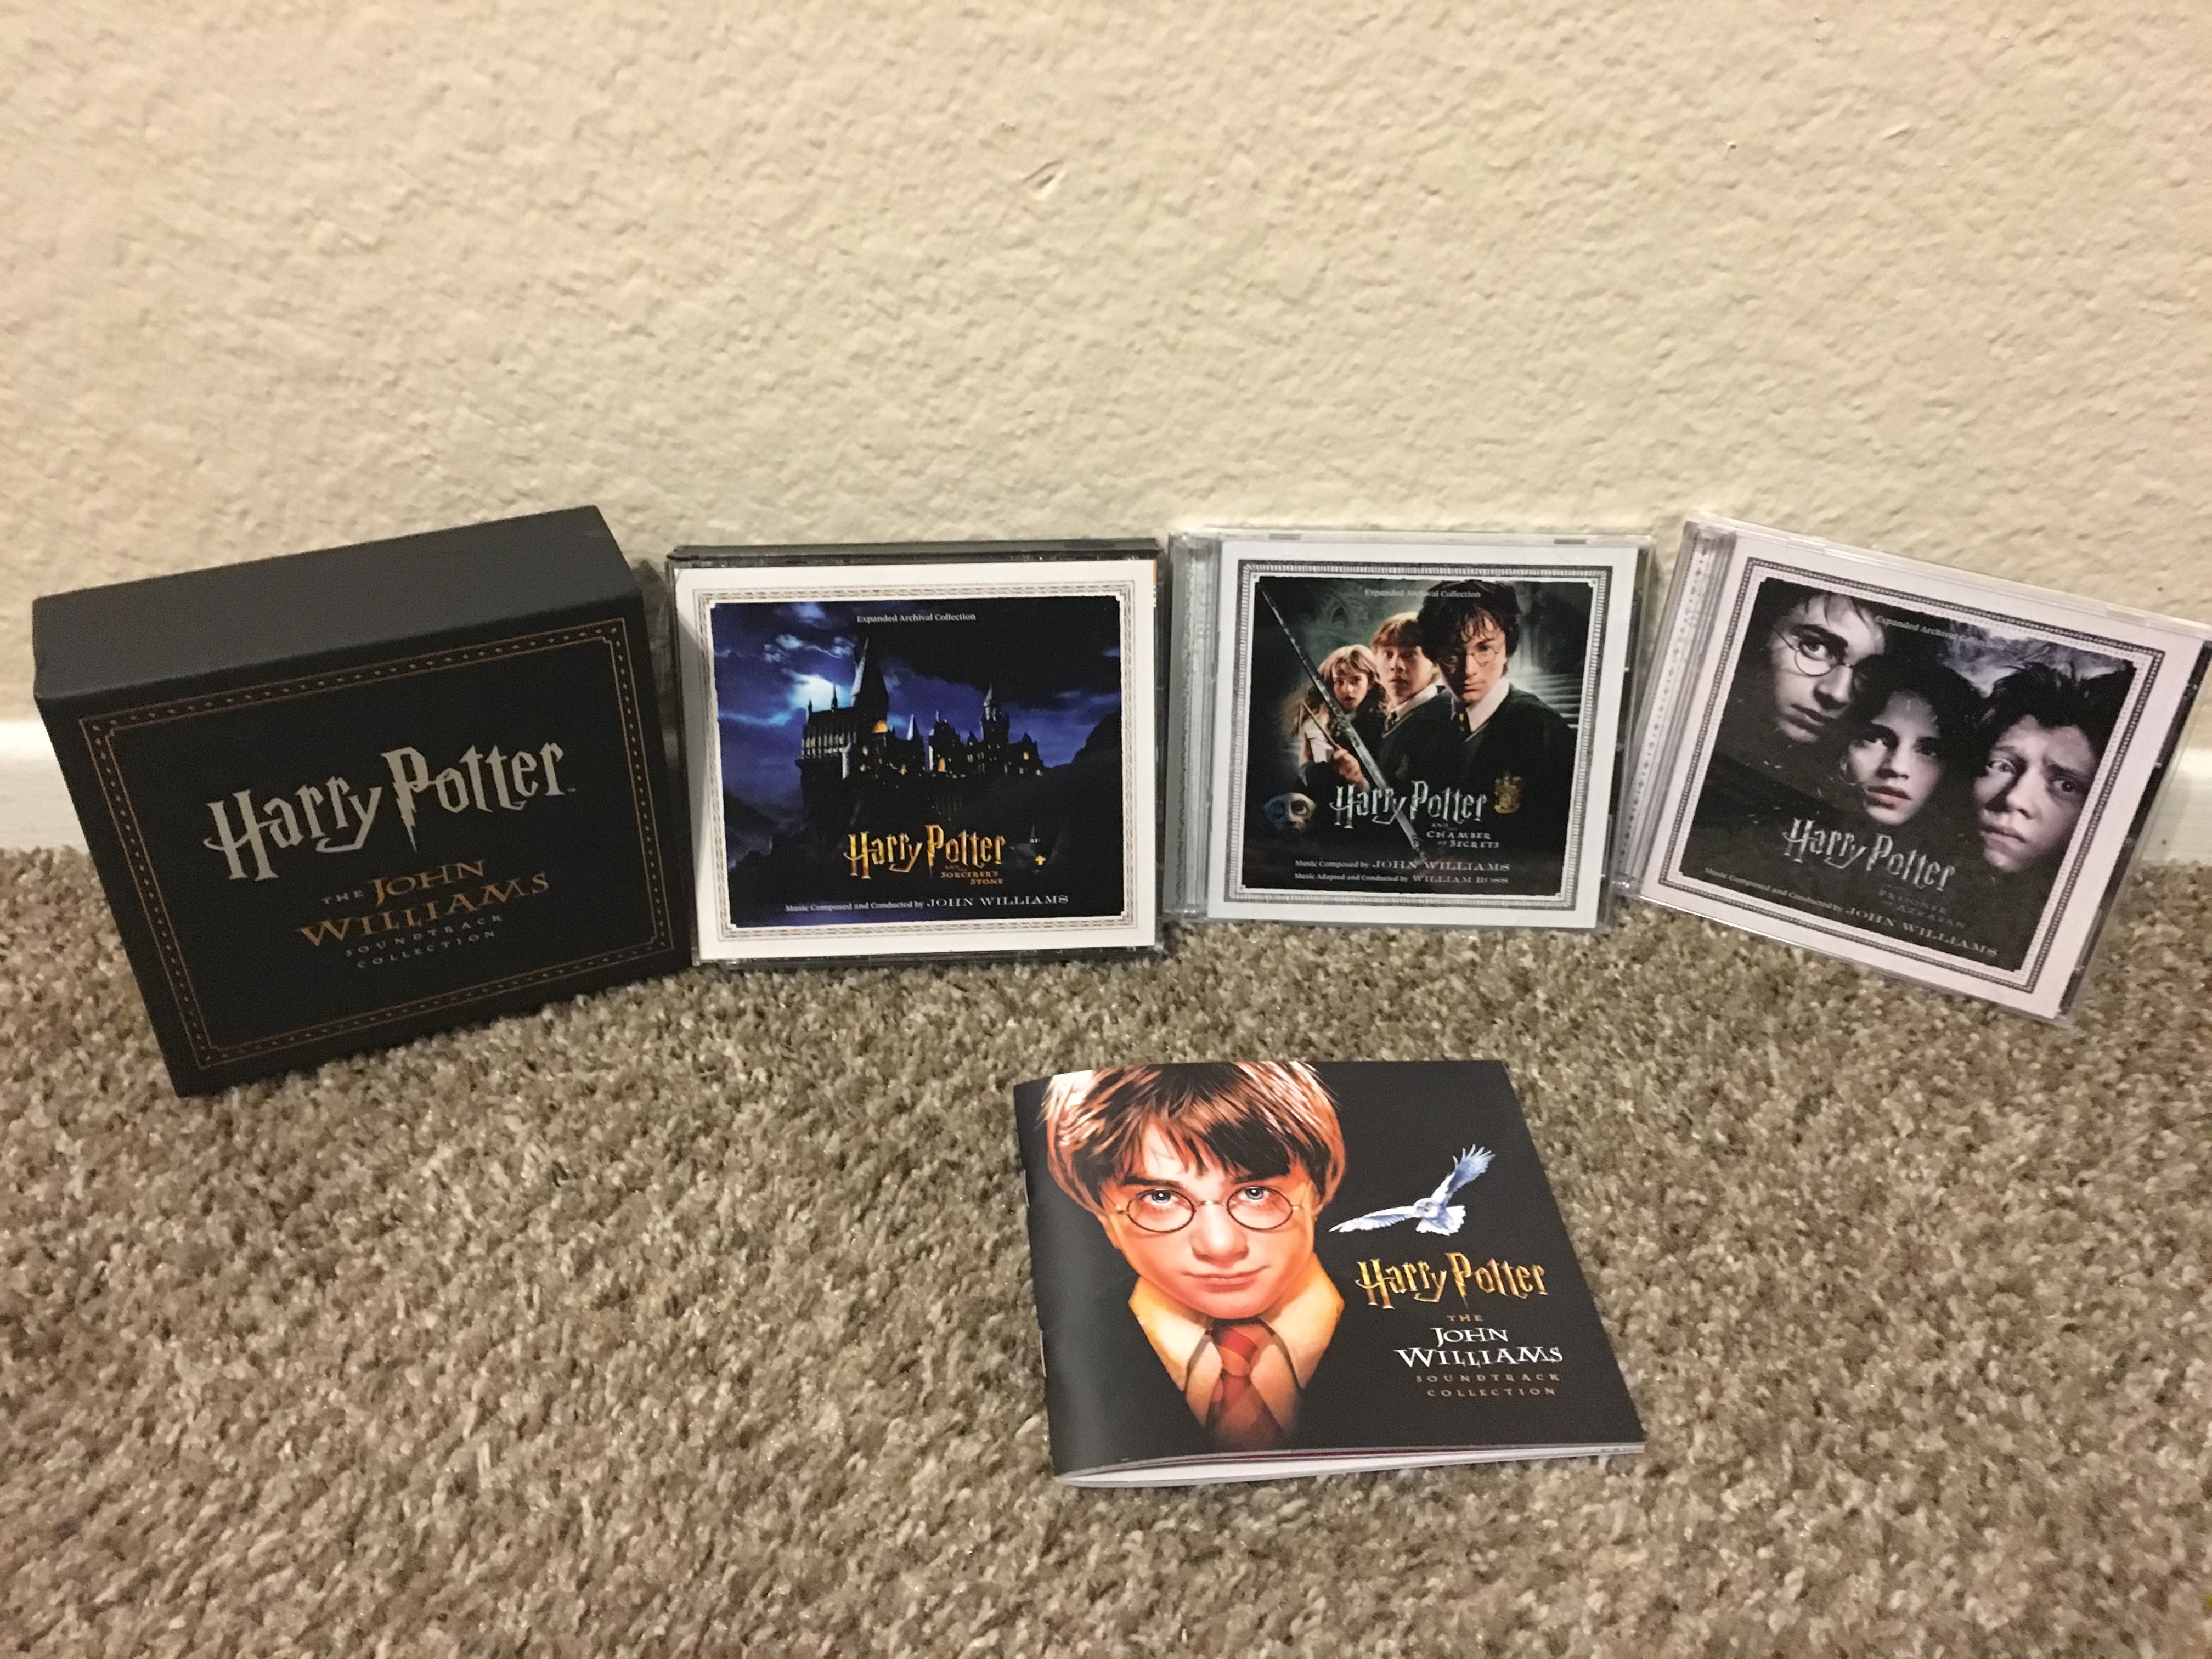 “Harry Potter: The John Williams Soundtrack Collection”, showing the box and all disc cases